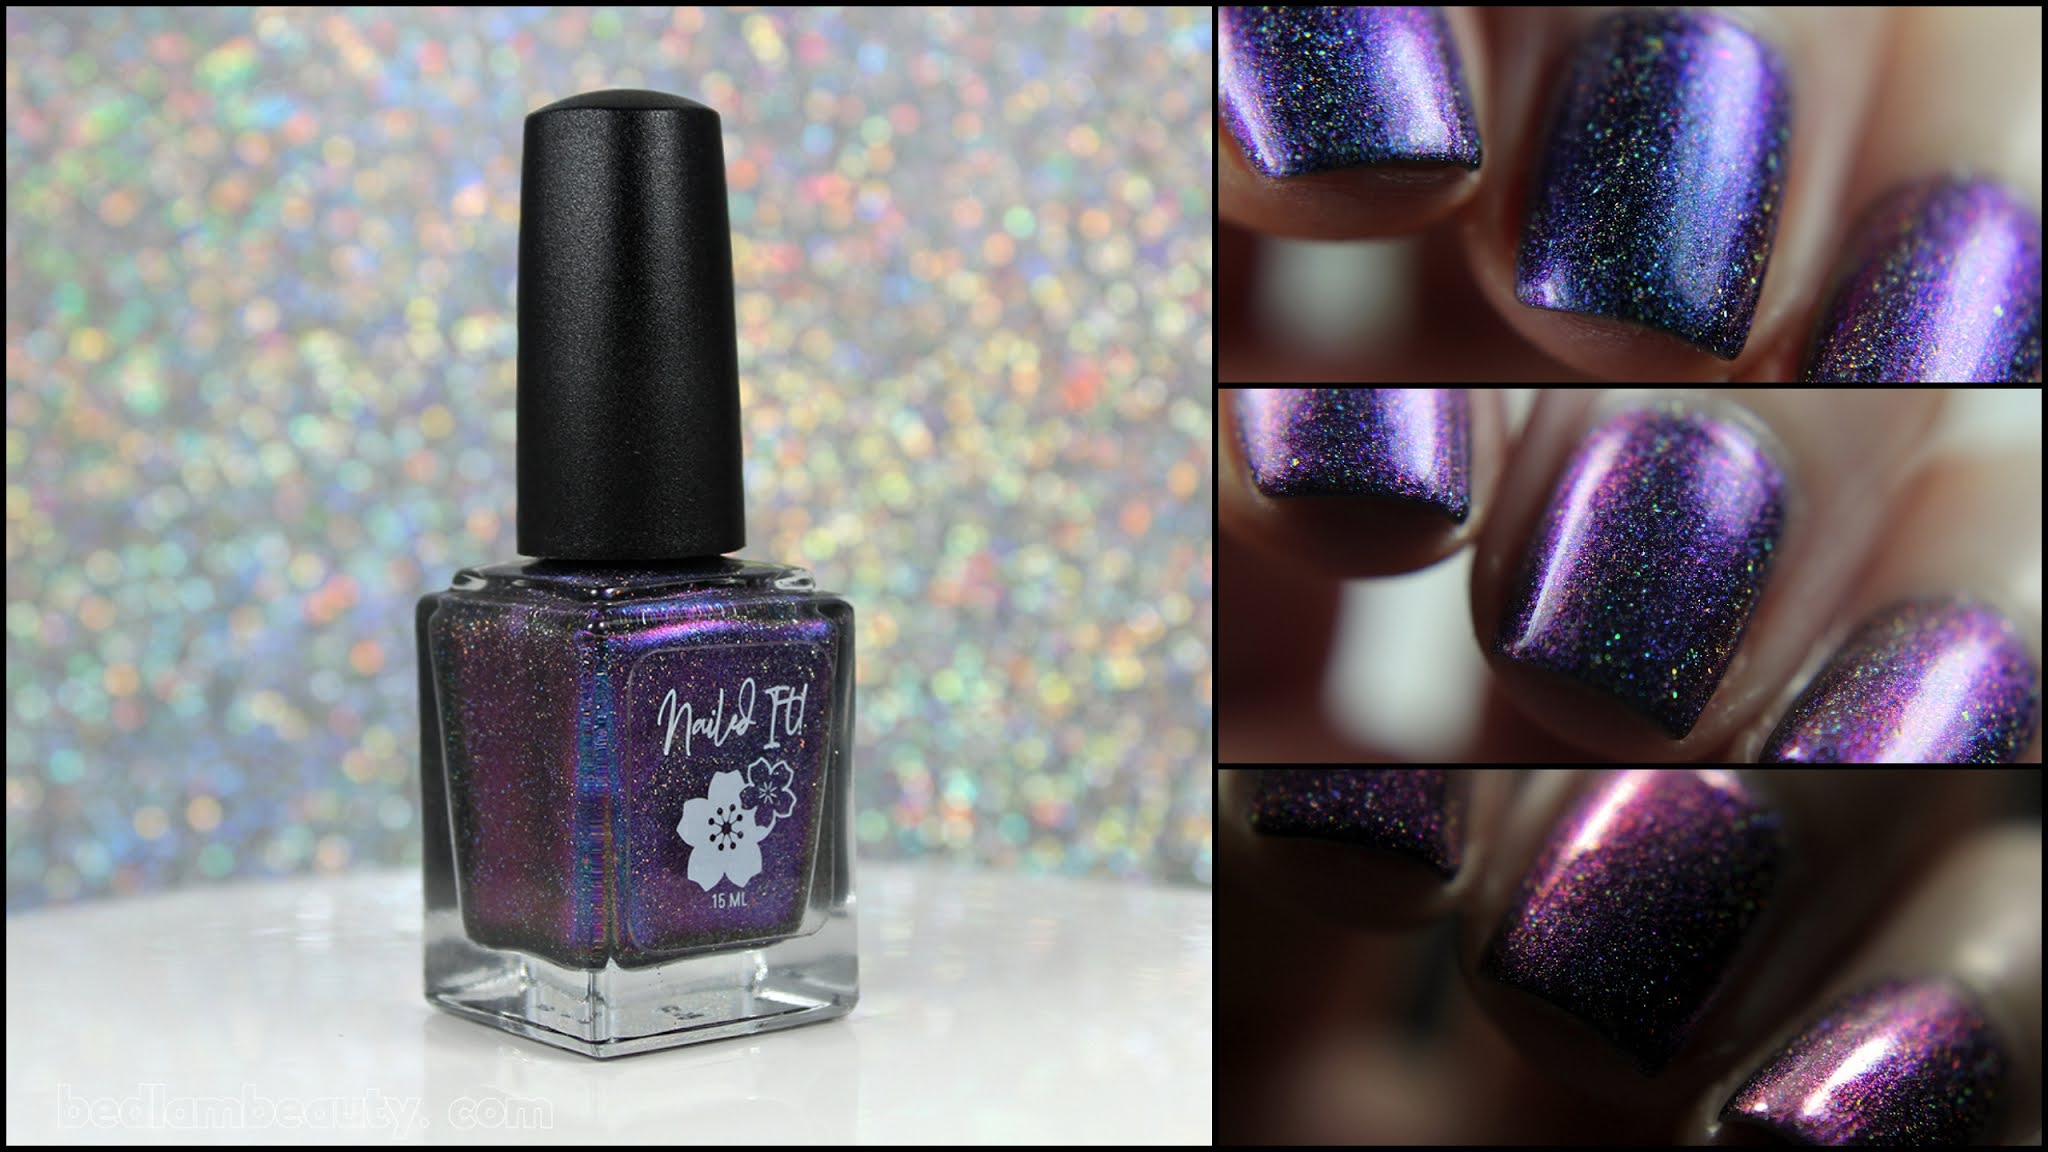 Nailed it Nail Polish - @shopsparkle_shine is creating a beautiful duo to  help support a nonprofit organization dedicated to helping Ukrainians  affected by the Russian invasion. $10 of every set sold will